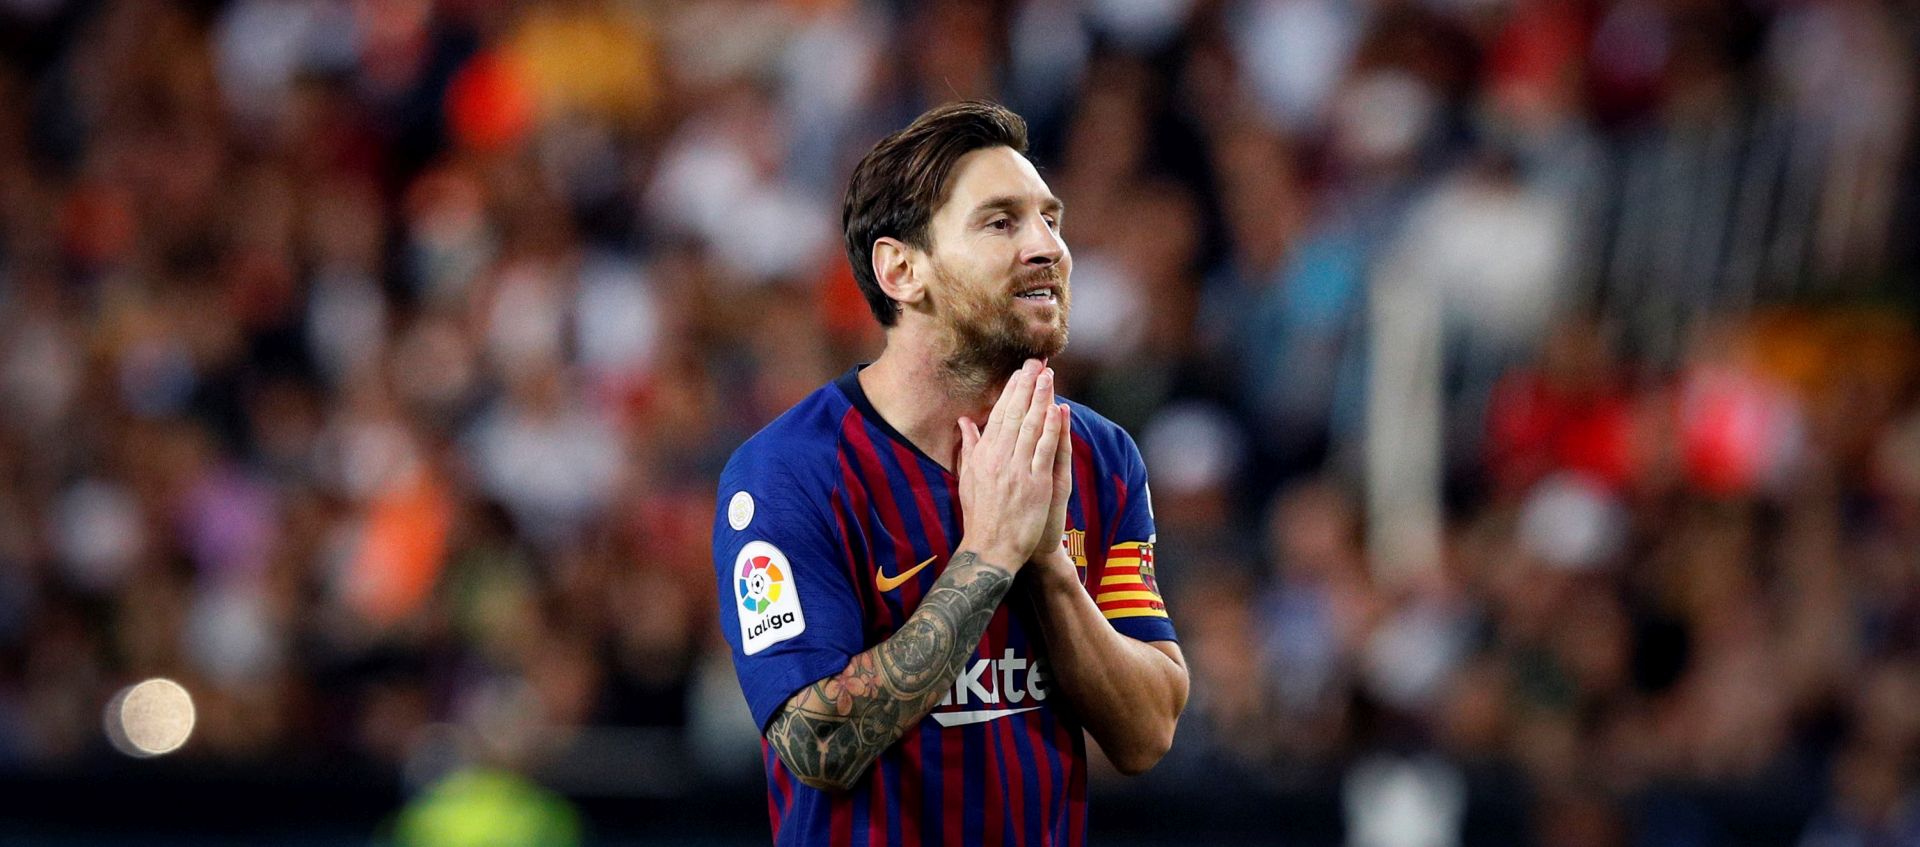 epa07077649 FC Barcelona's Leo Messi reacts during a Spanish LaLiga soccer match between Valencia CF and FC Barcelona at Mestalla stadium, Valencia eastern Spain, 07 October 2018.  EPA/Kai Foersterling